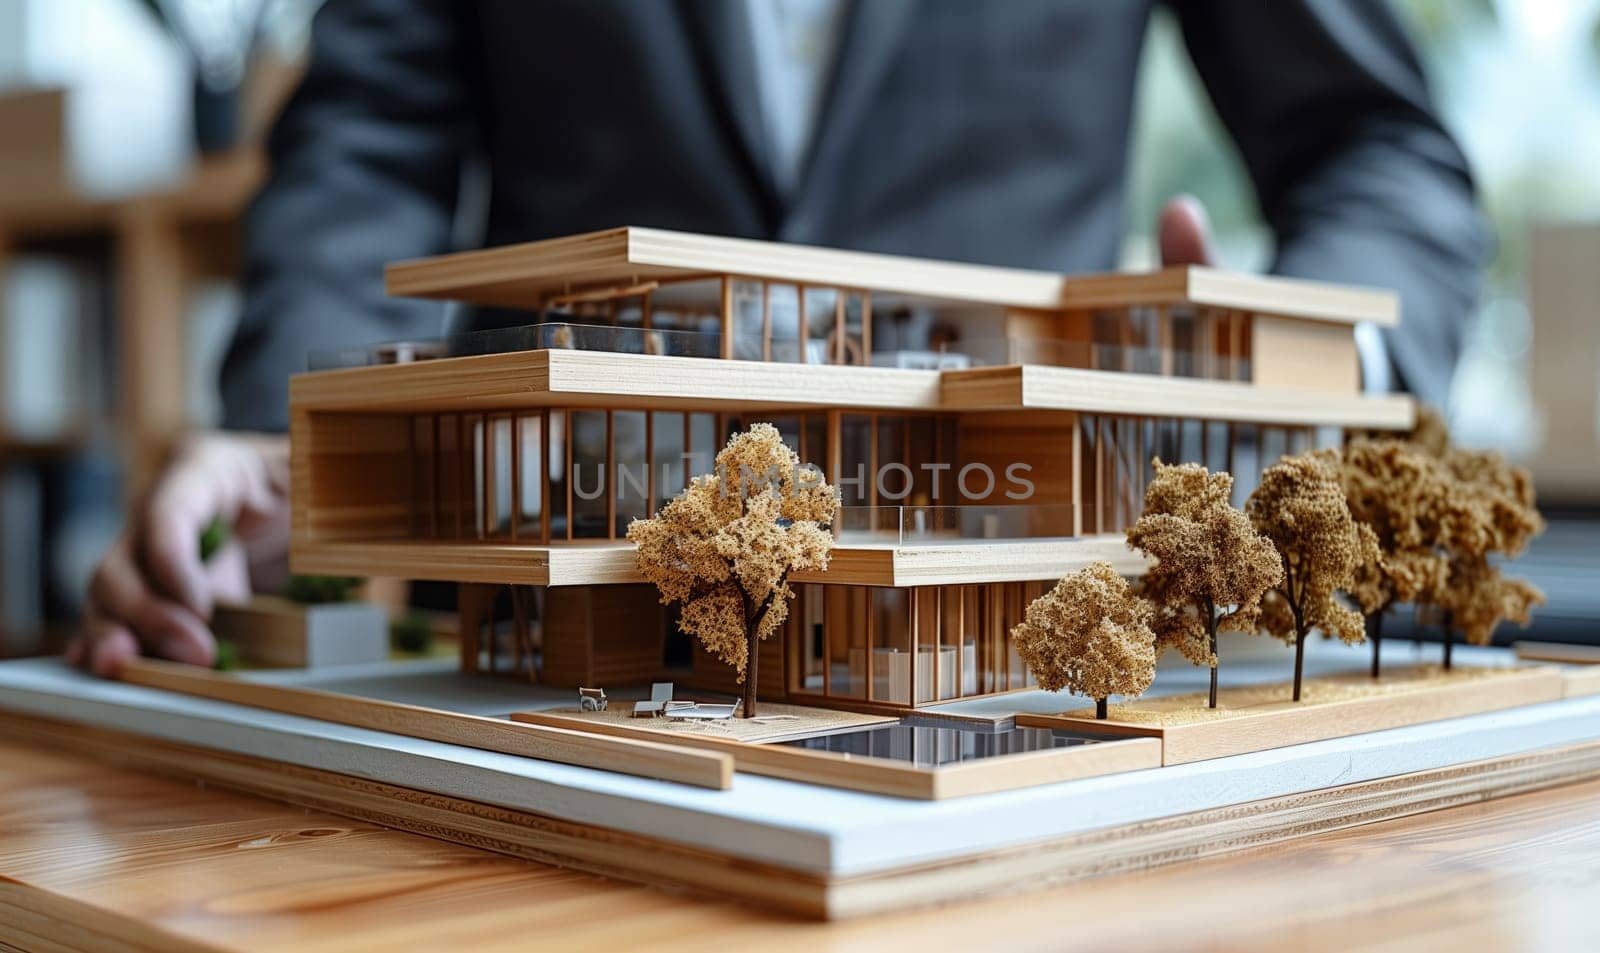 A man is showcasing a miniature wooden house model on a table, highlighting the intricate hardwood facade, roof, and flooring details